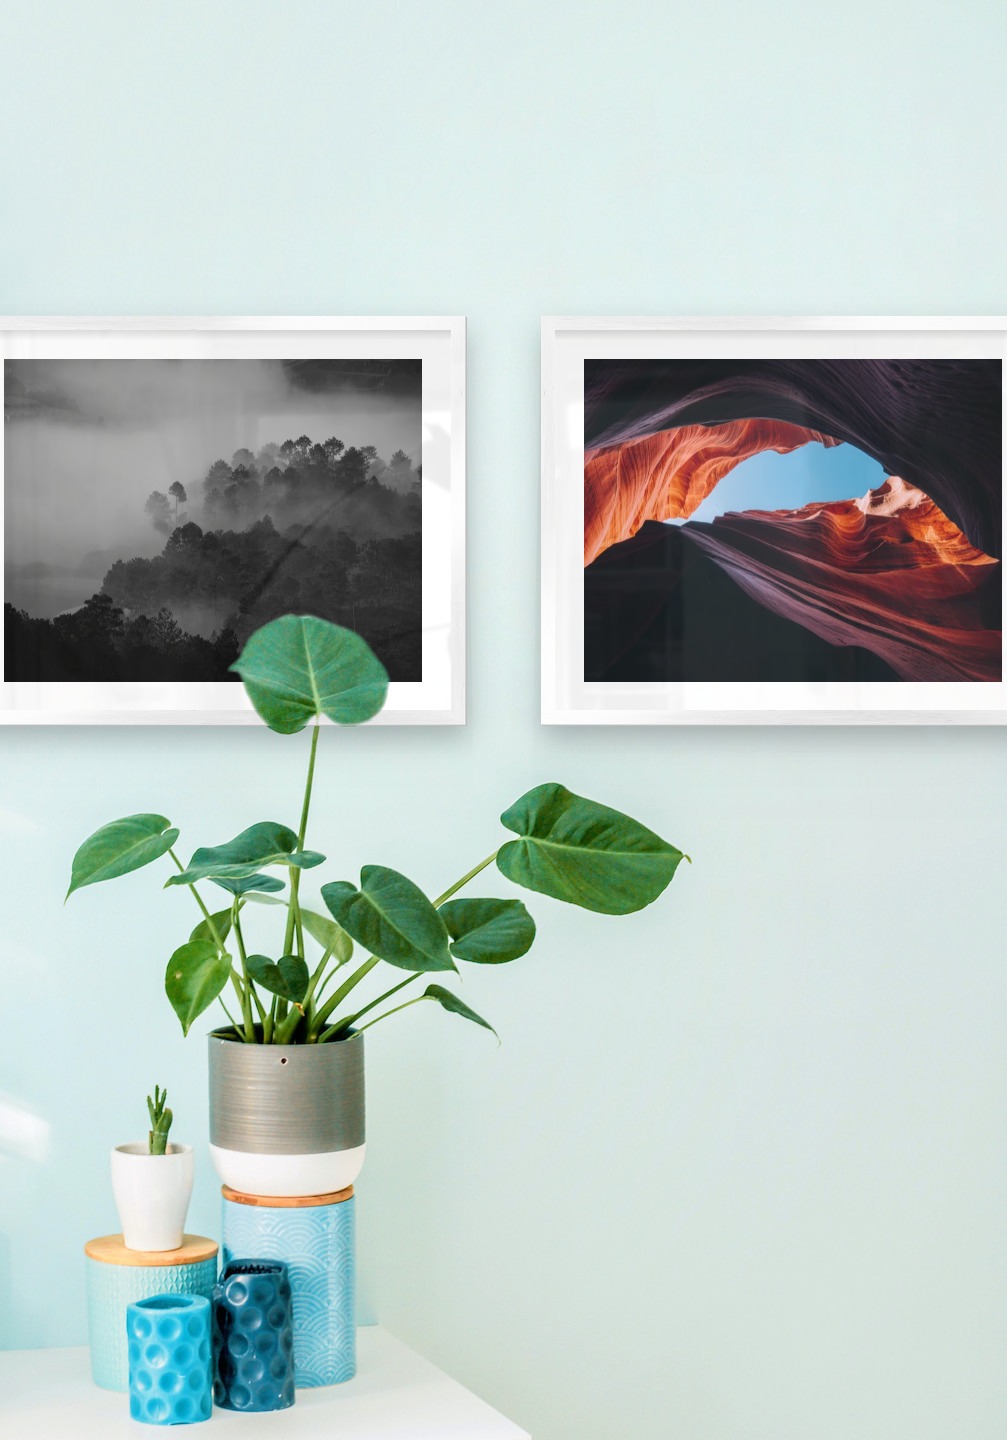 Gallery wall with picture frames in silver in sizes 40x50 with prints "Foggy wooden tops" and "Red rock formations"